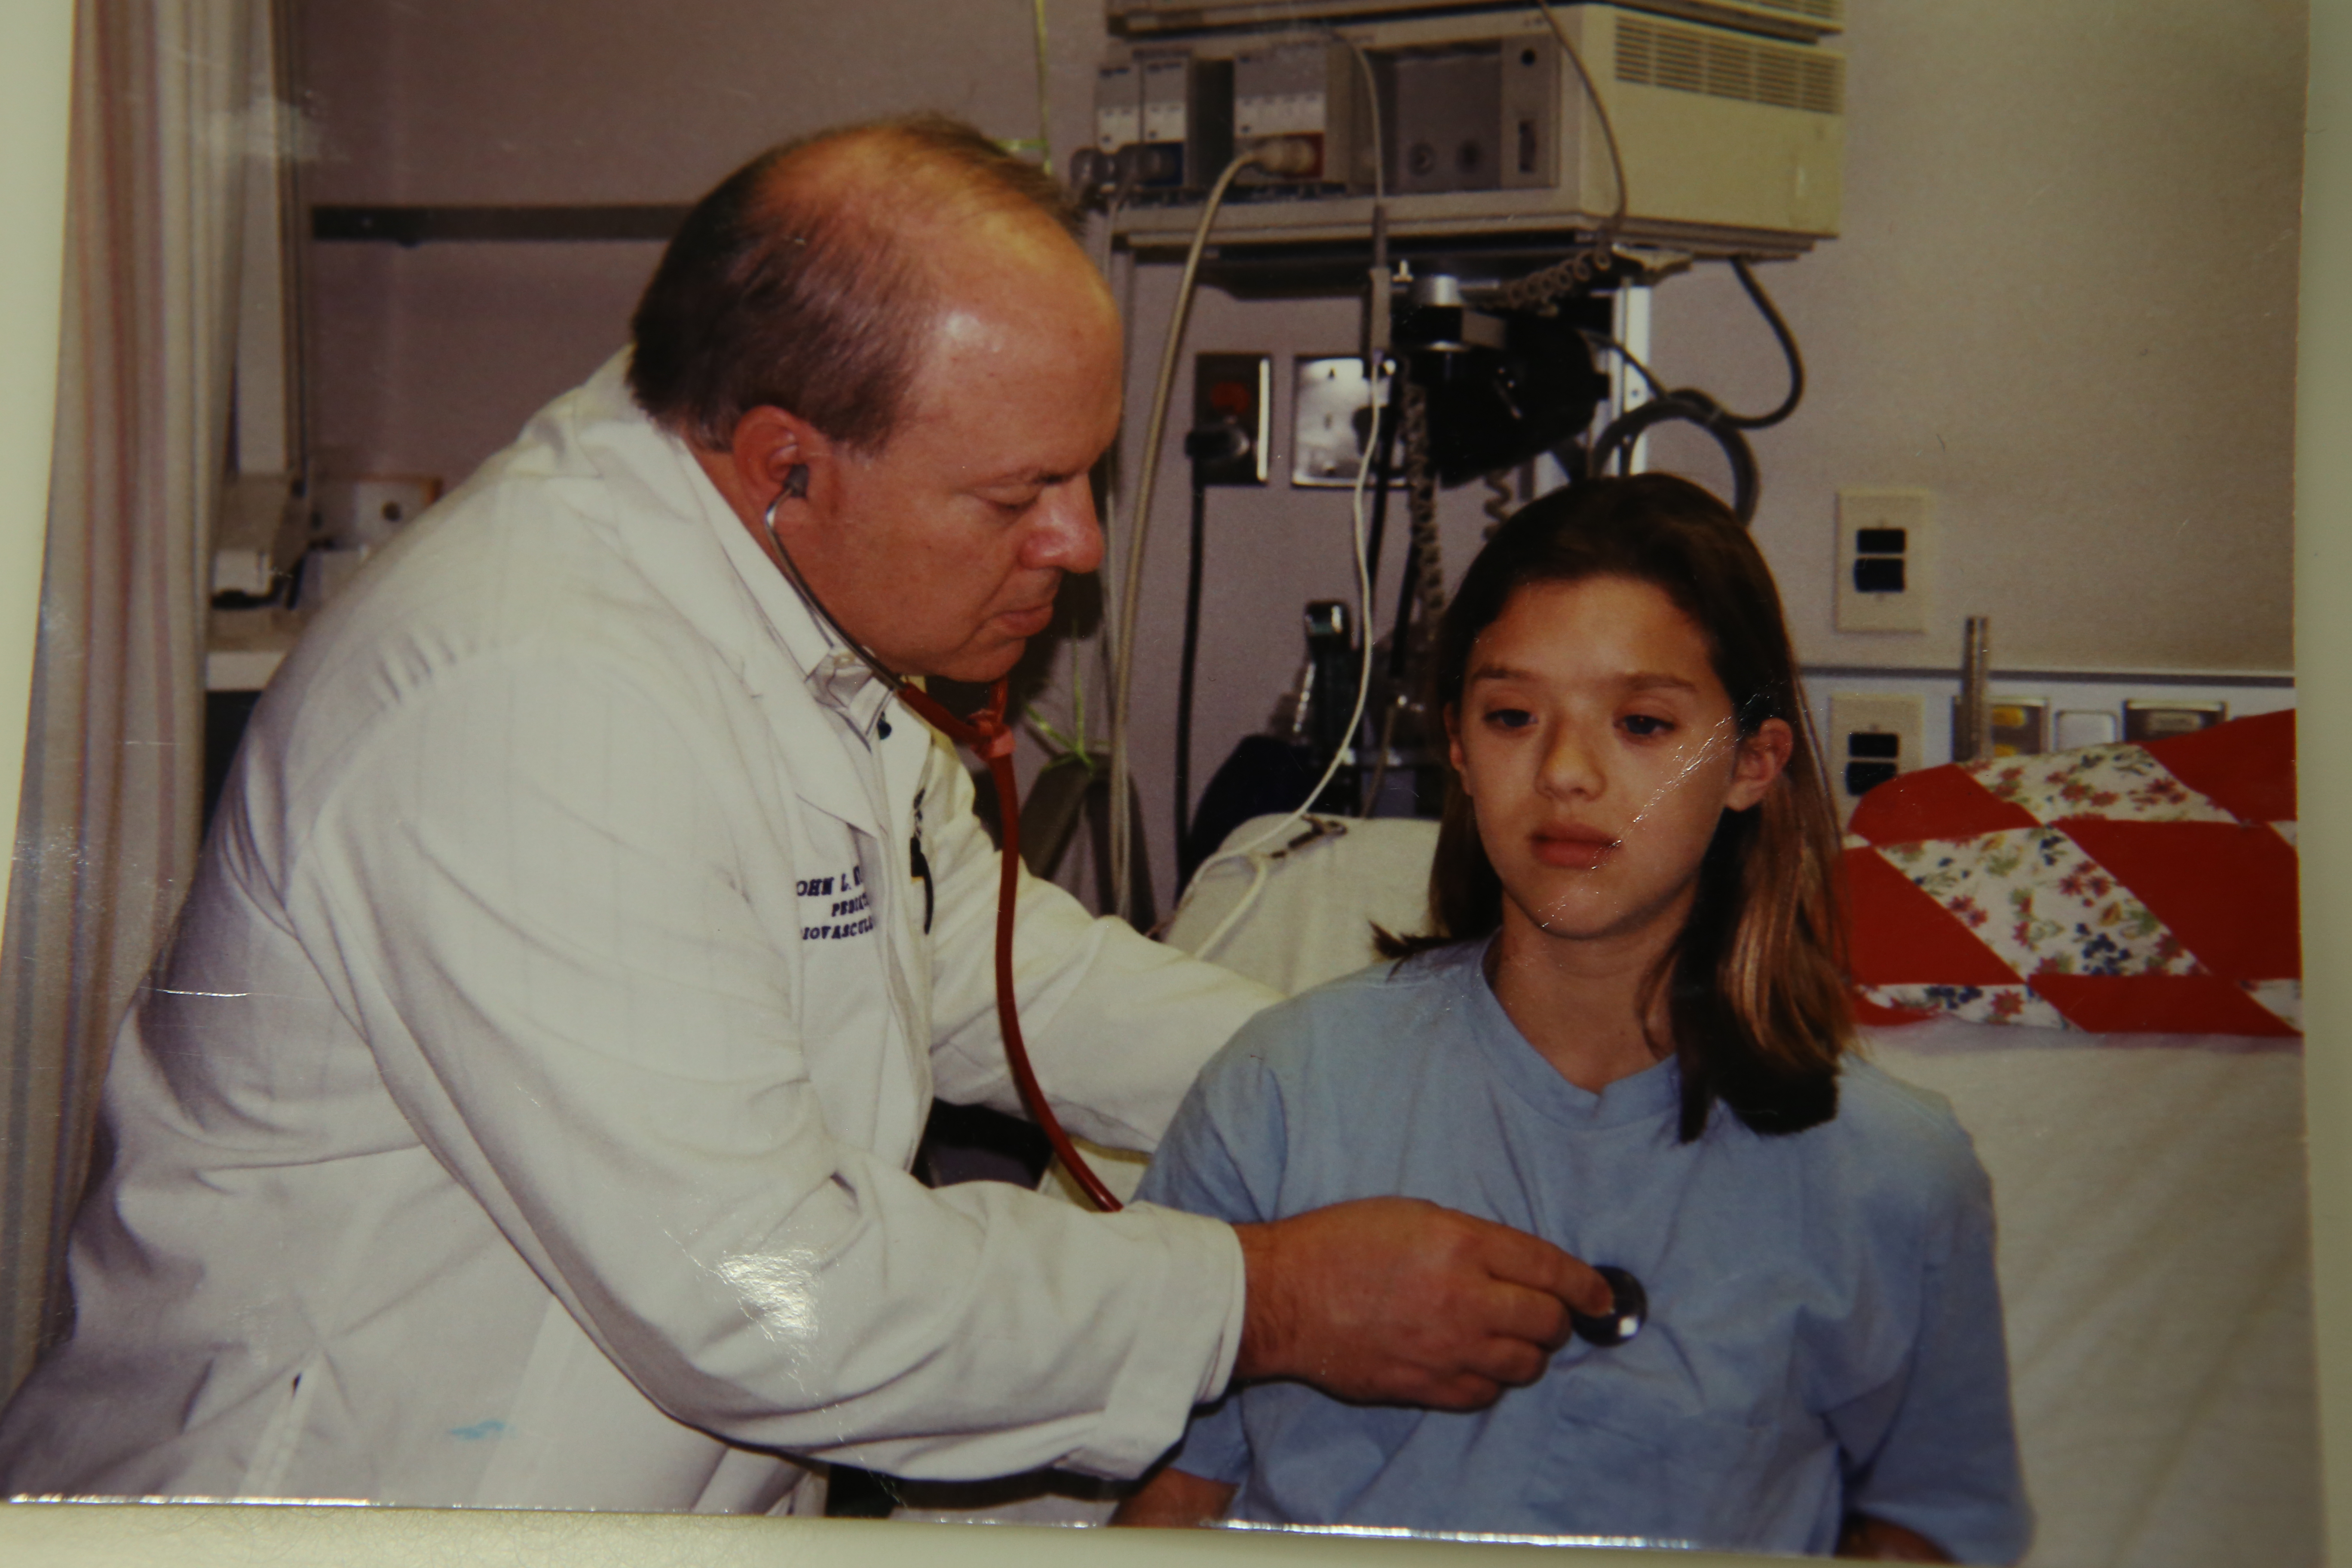 Lindsay Requa when she was a patient of Dr. Myers